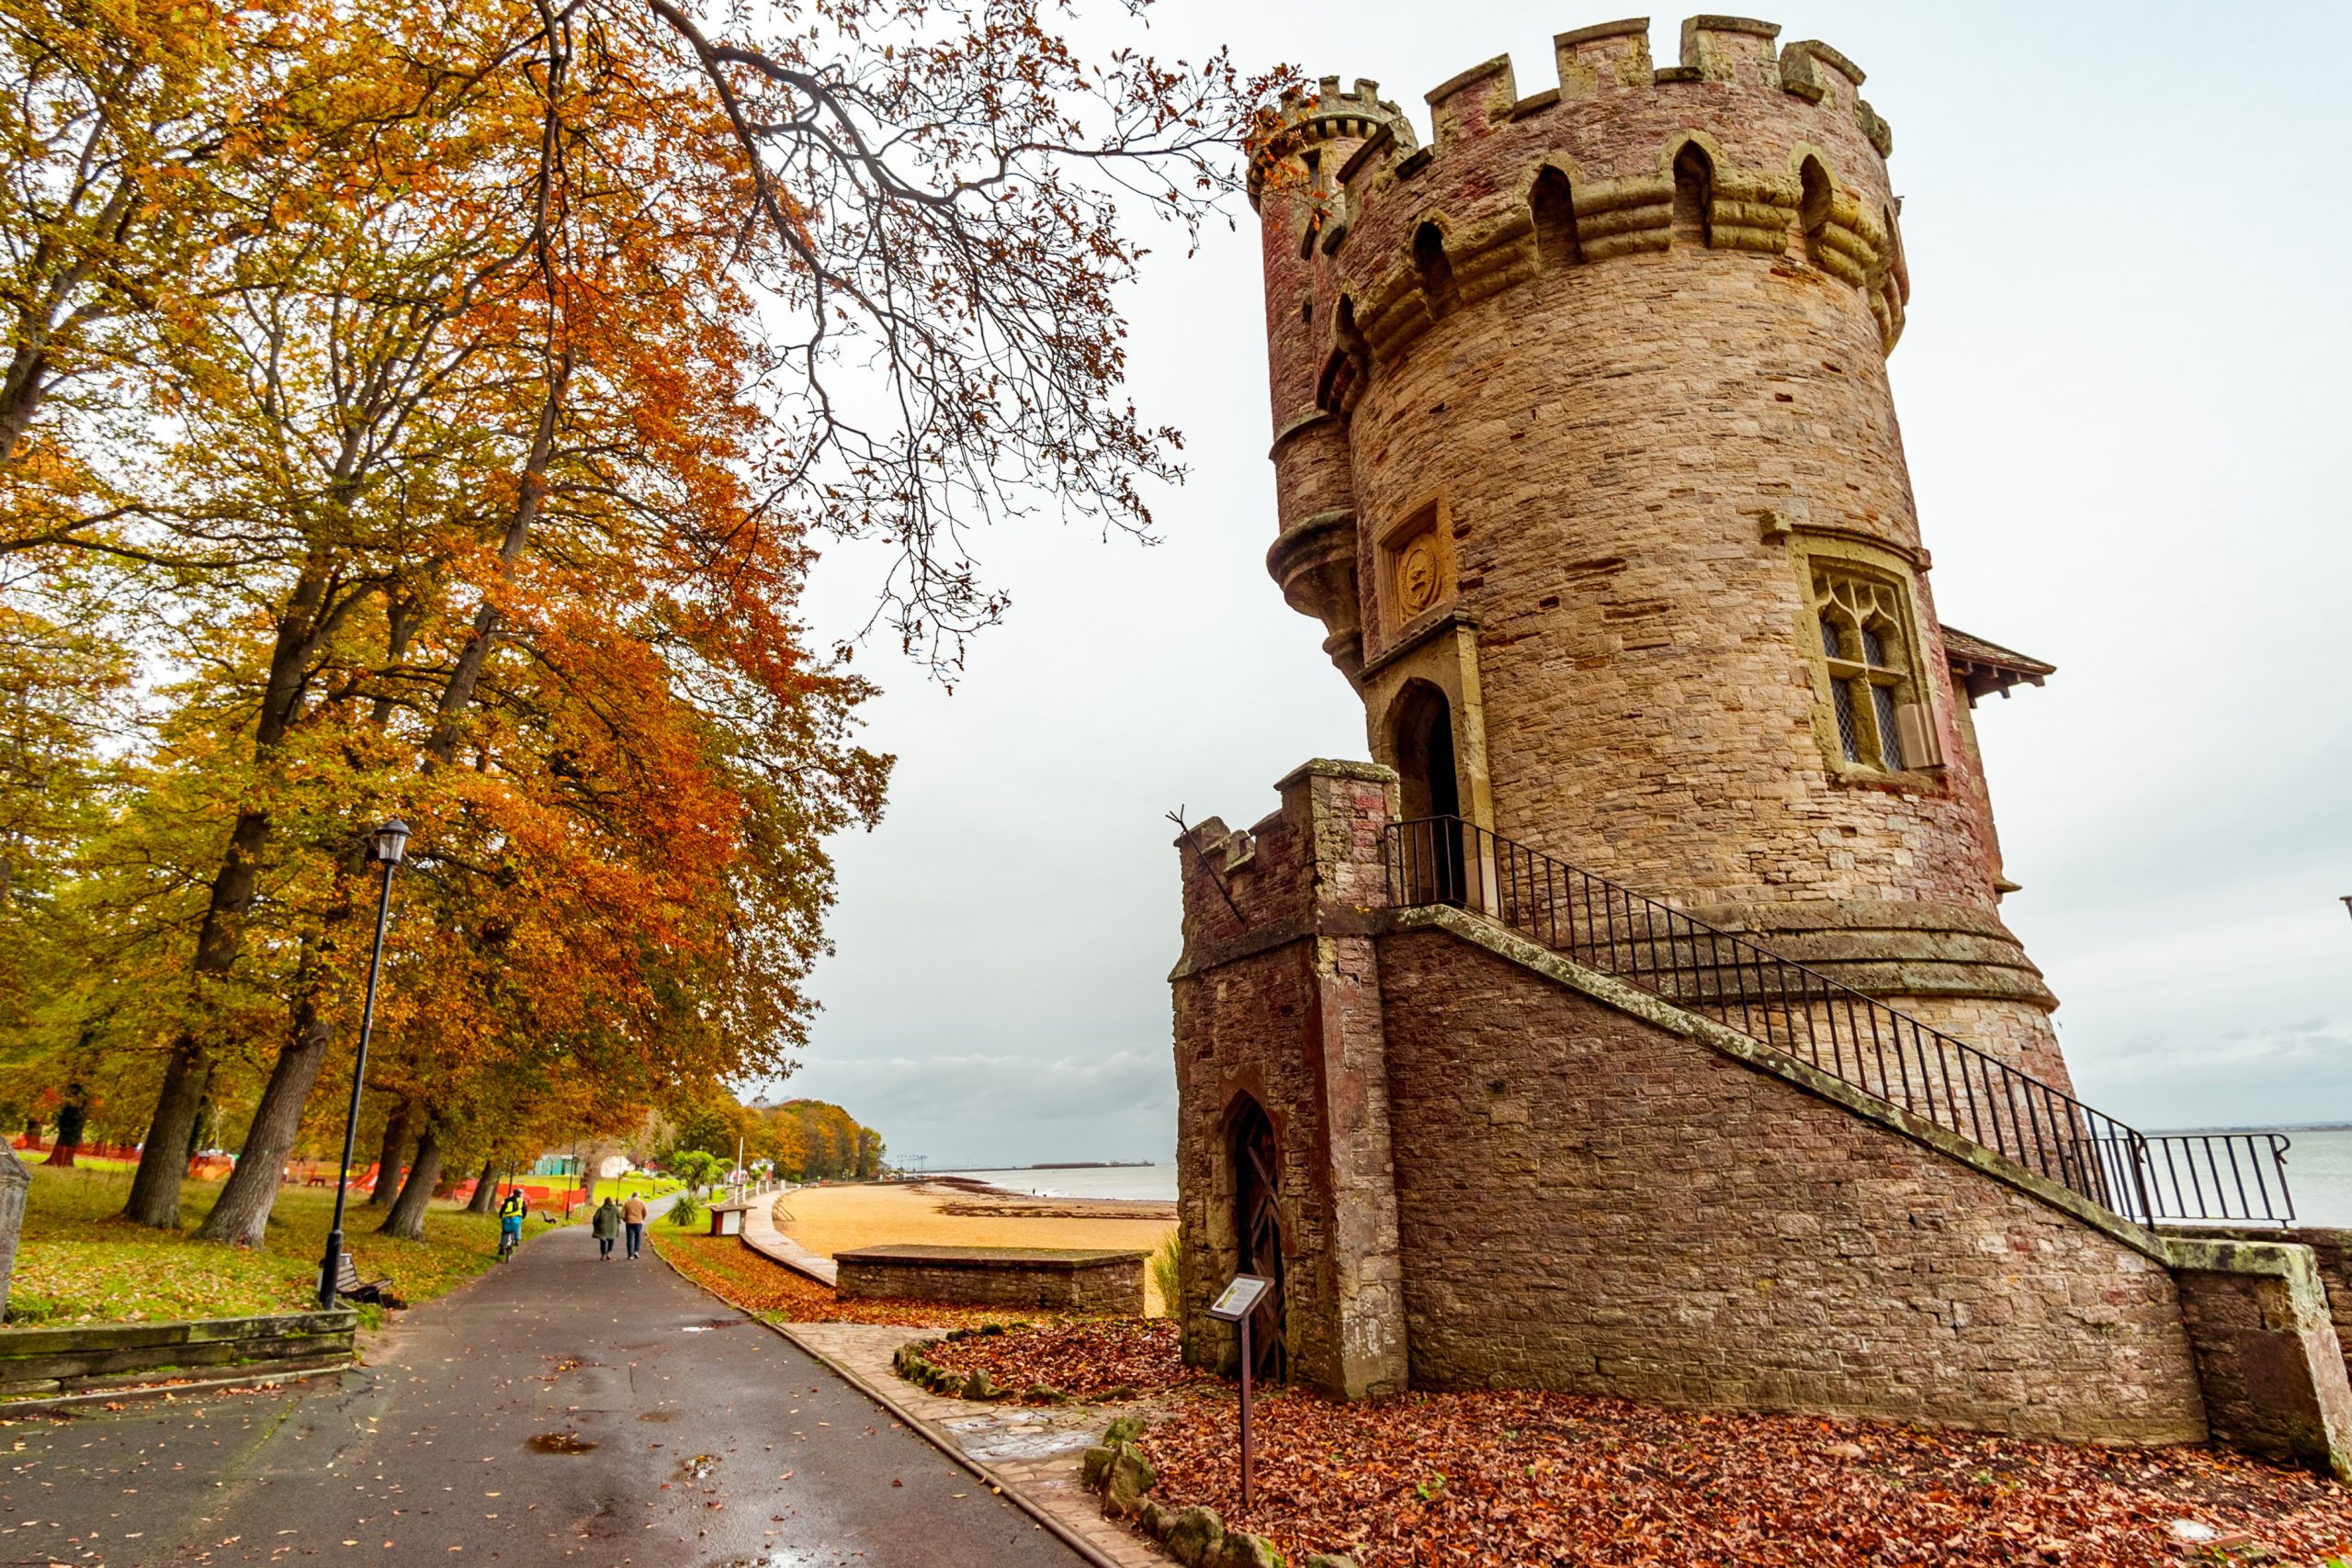 Appley Tower in Ryde in the autumn